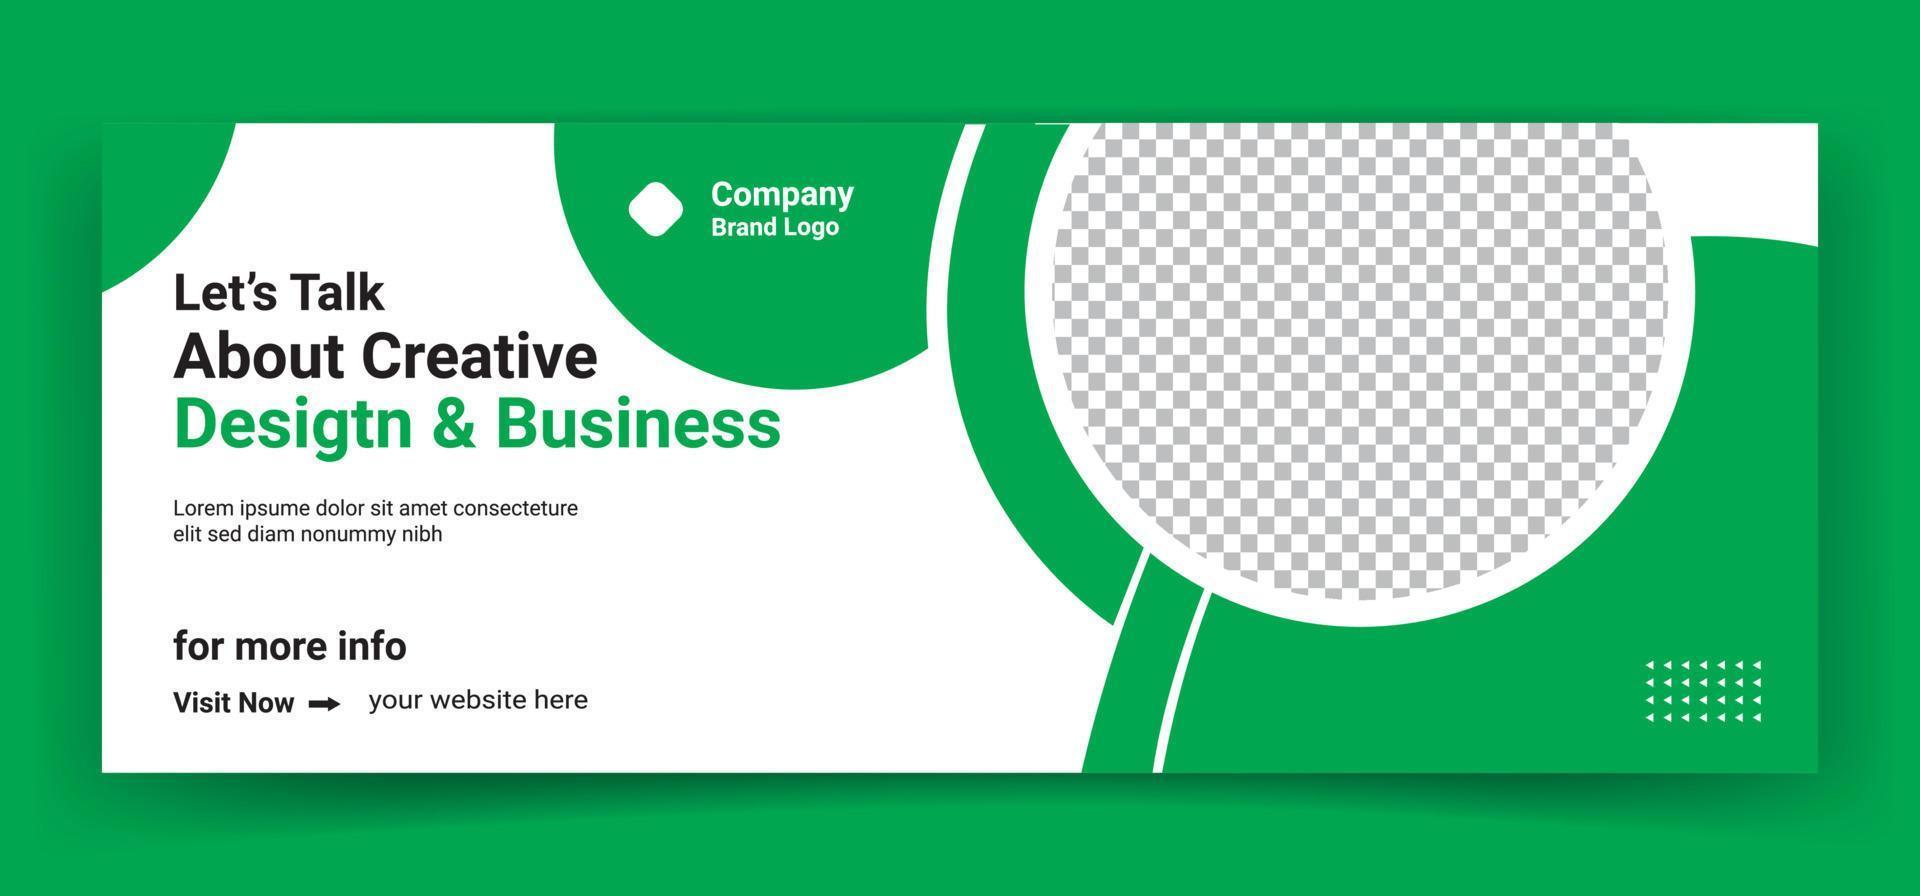 business  cover page or web ads banner design template Free Vector